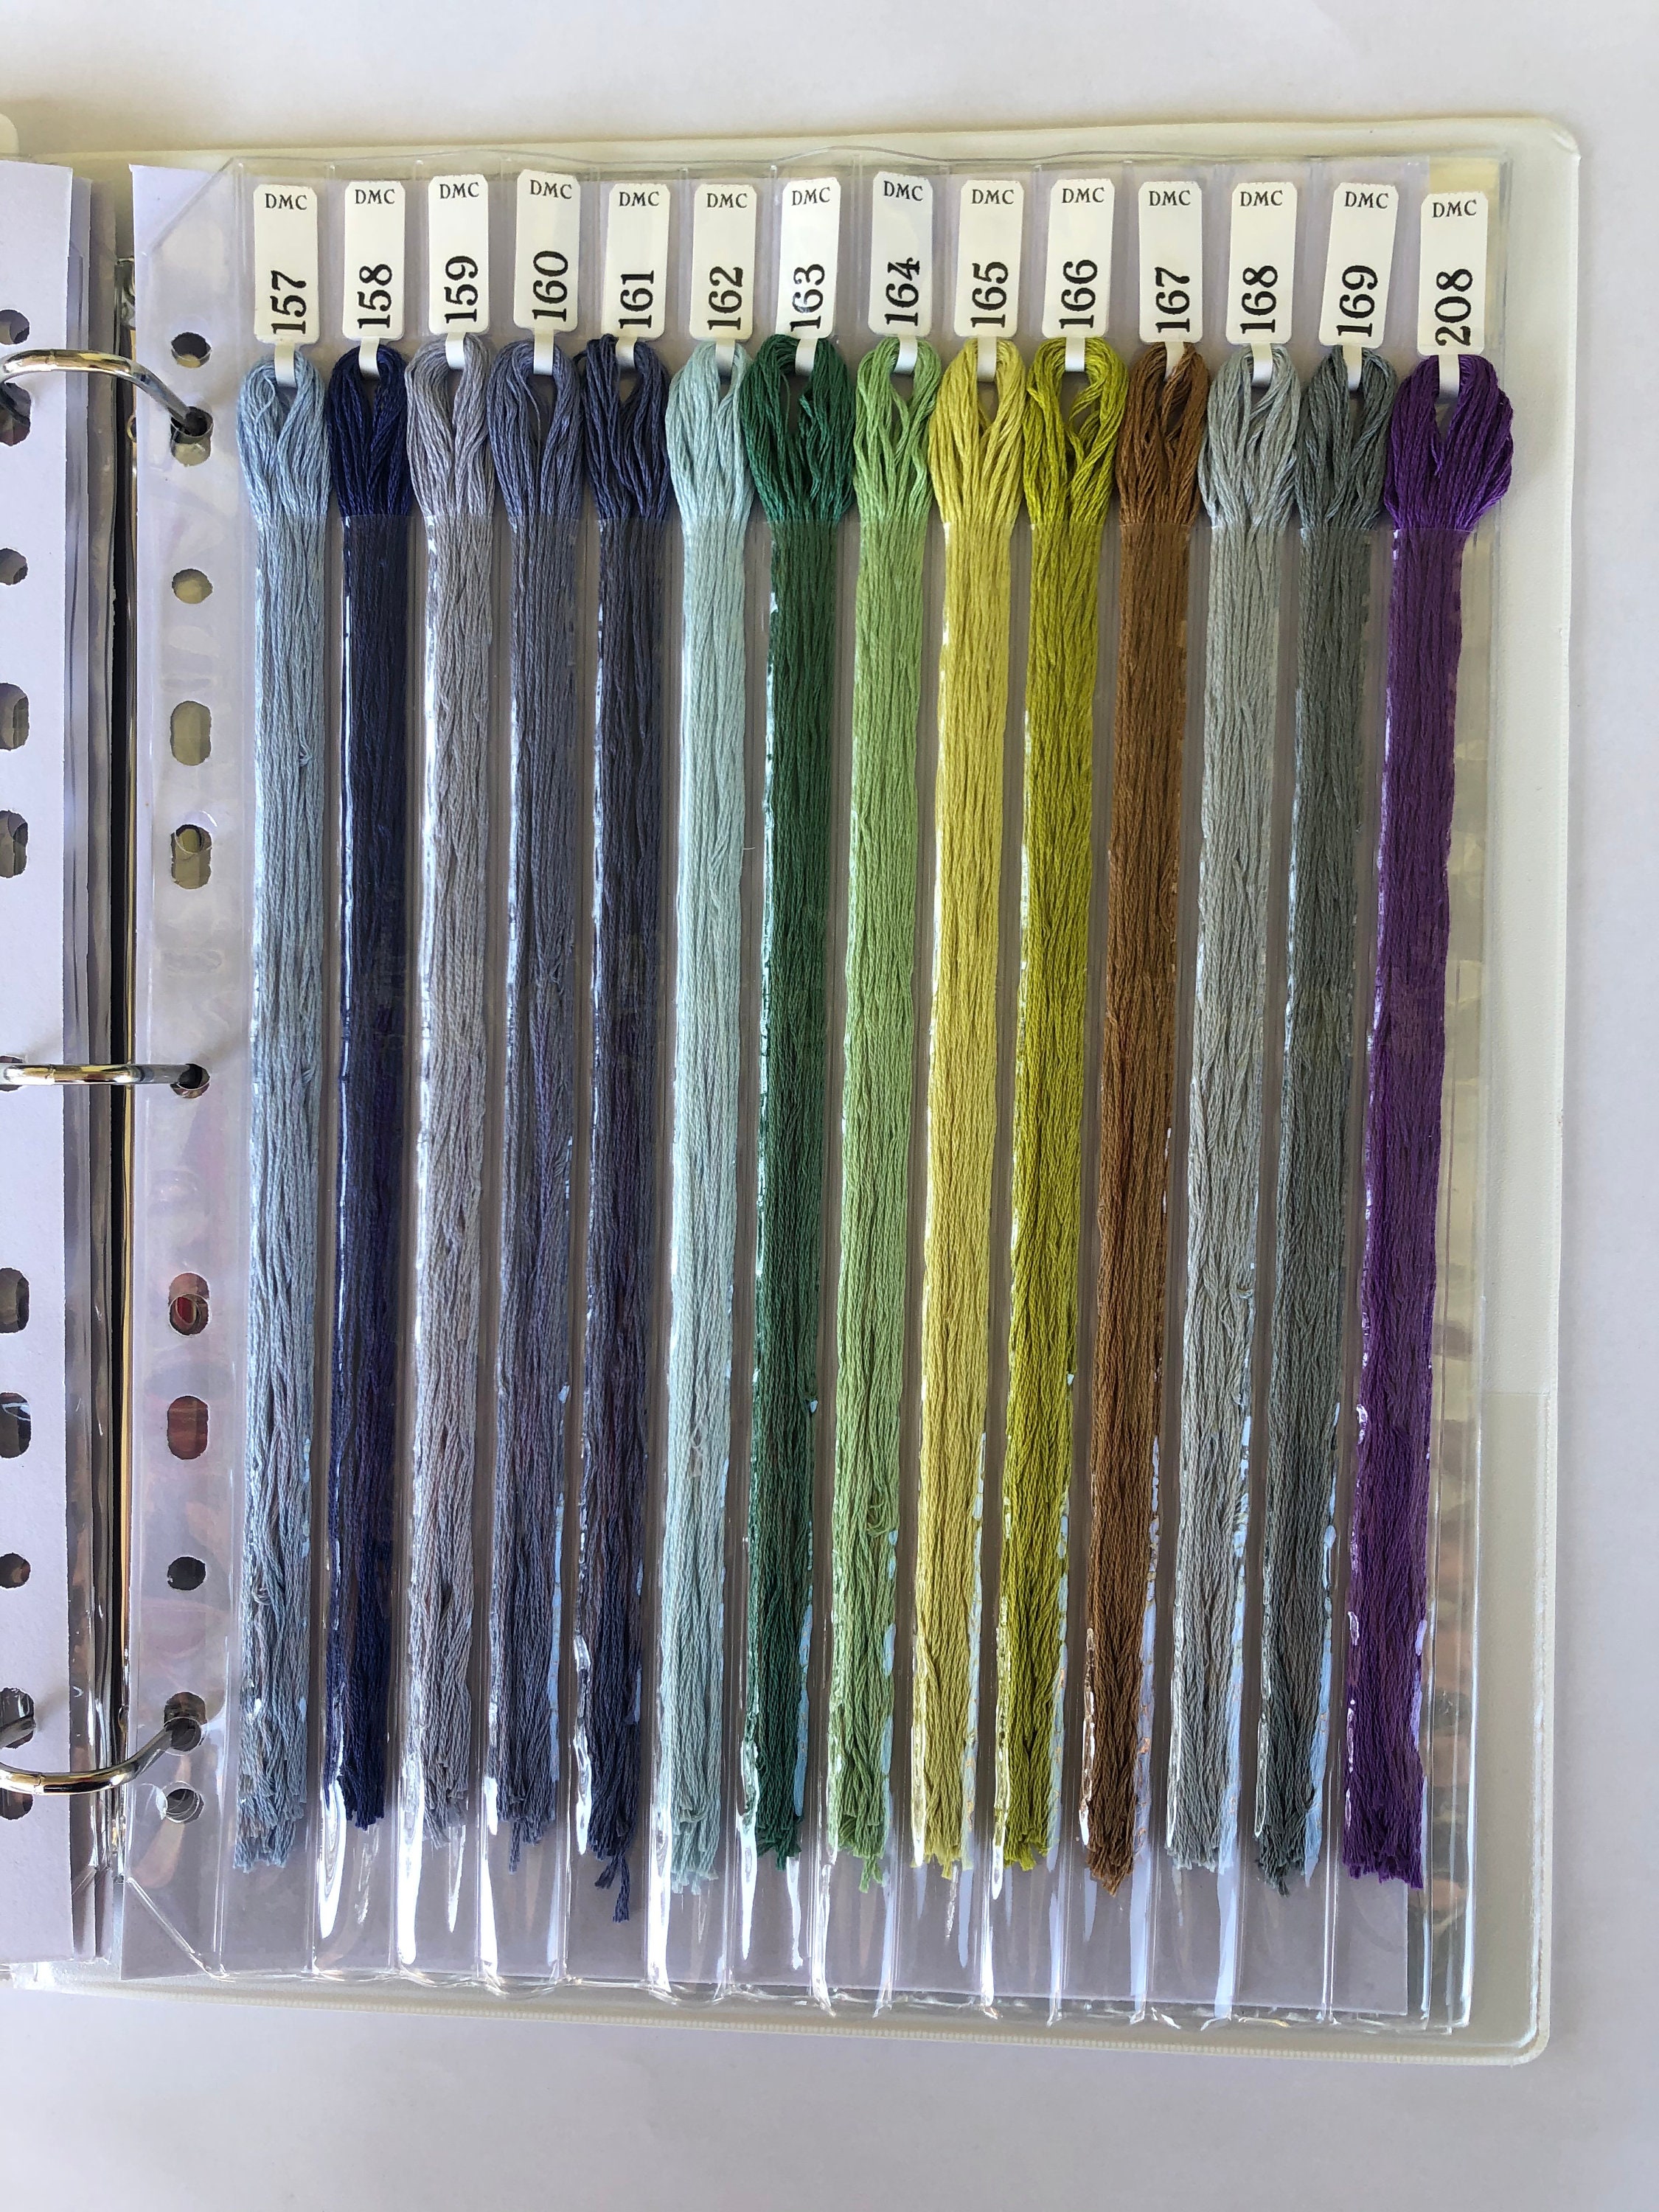 Flossbook 2 and 5 Page Kits Embroidery Floss Storage -  Denmark